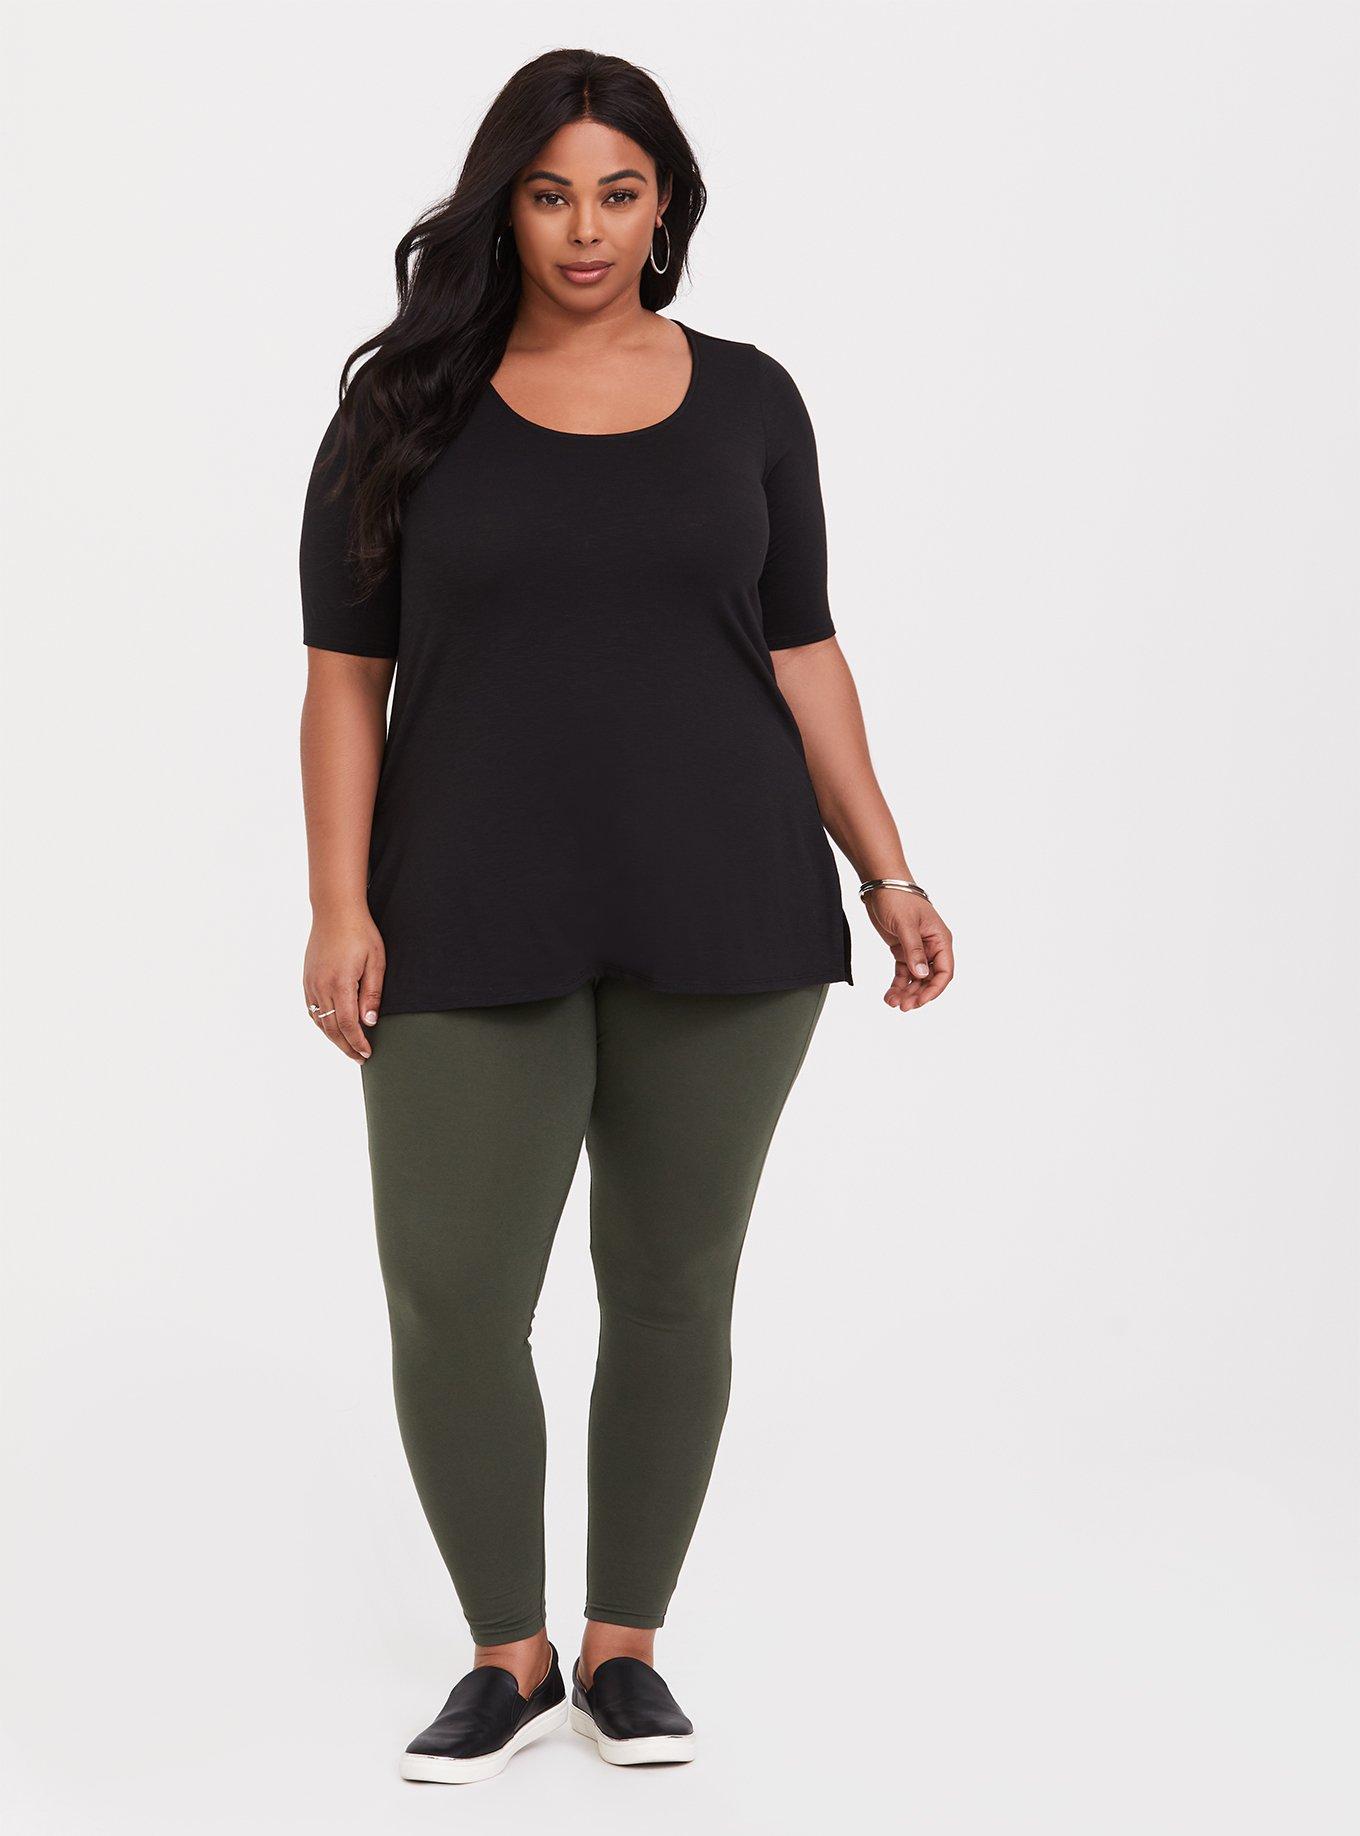 Torrid - Our best-selling leggings got an exciting update